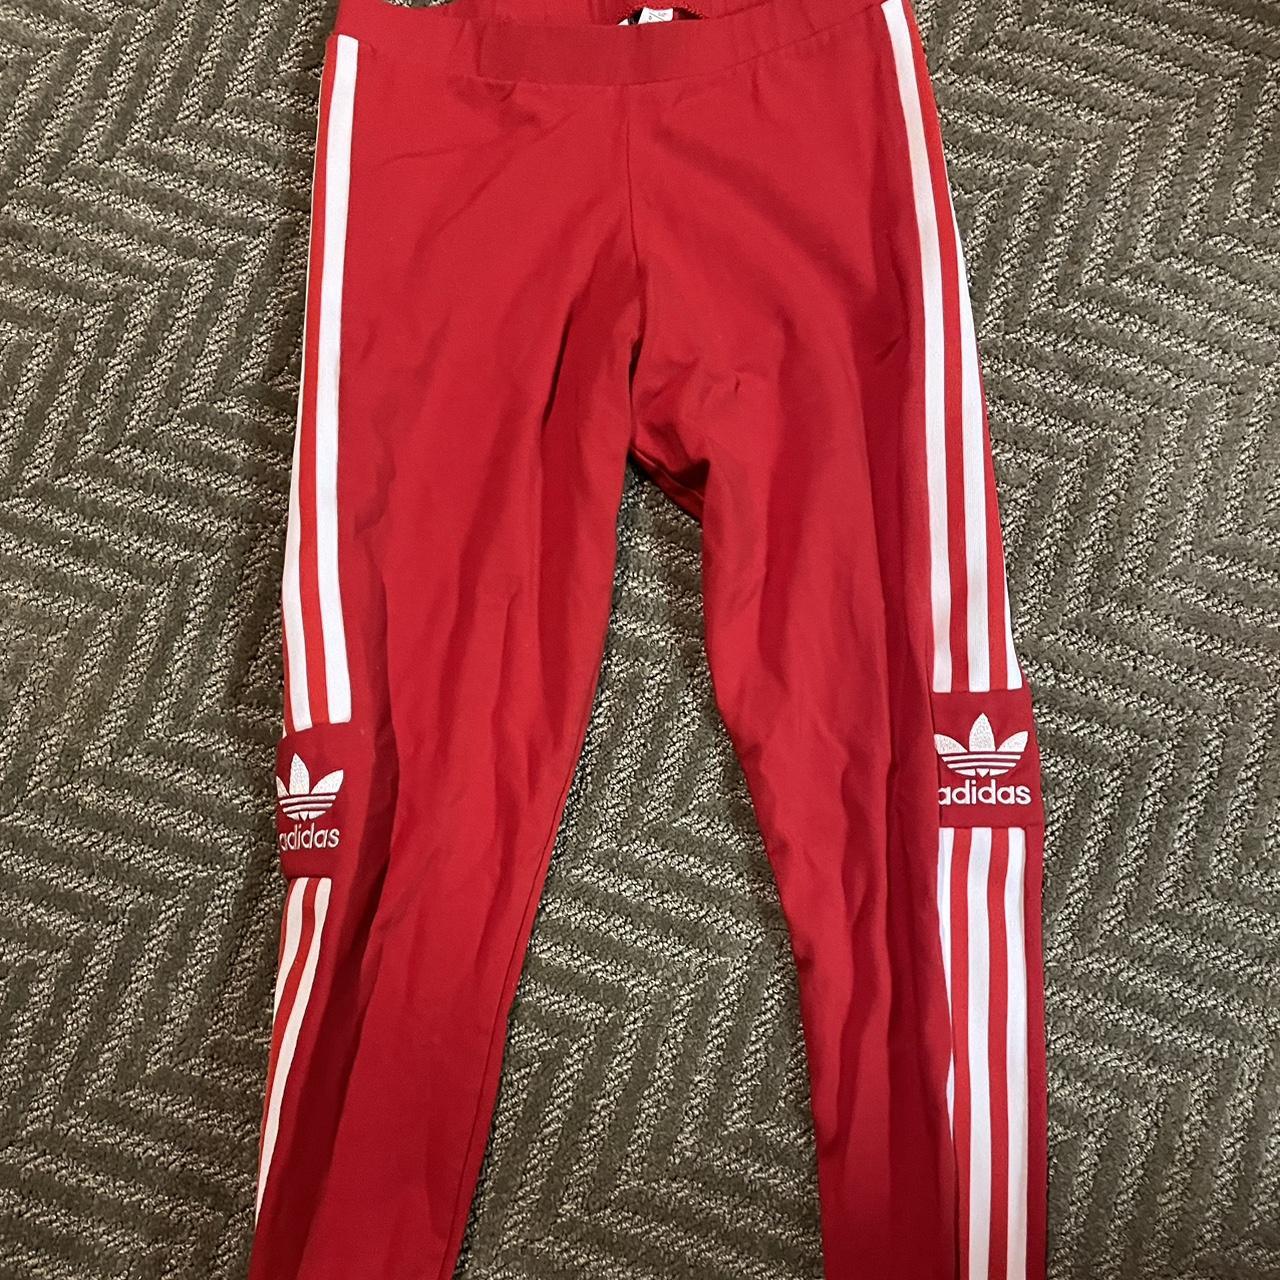 Red adidas leggings Never worn Size small - Depop